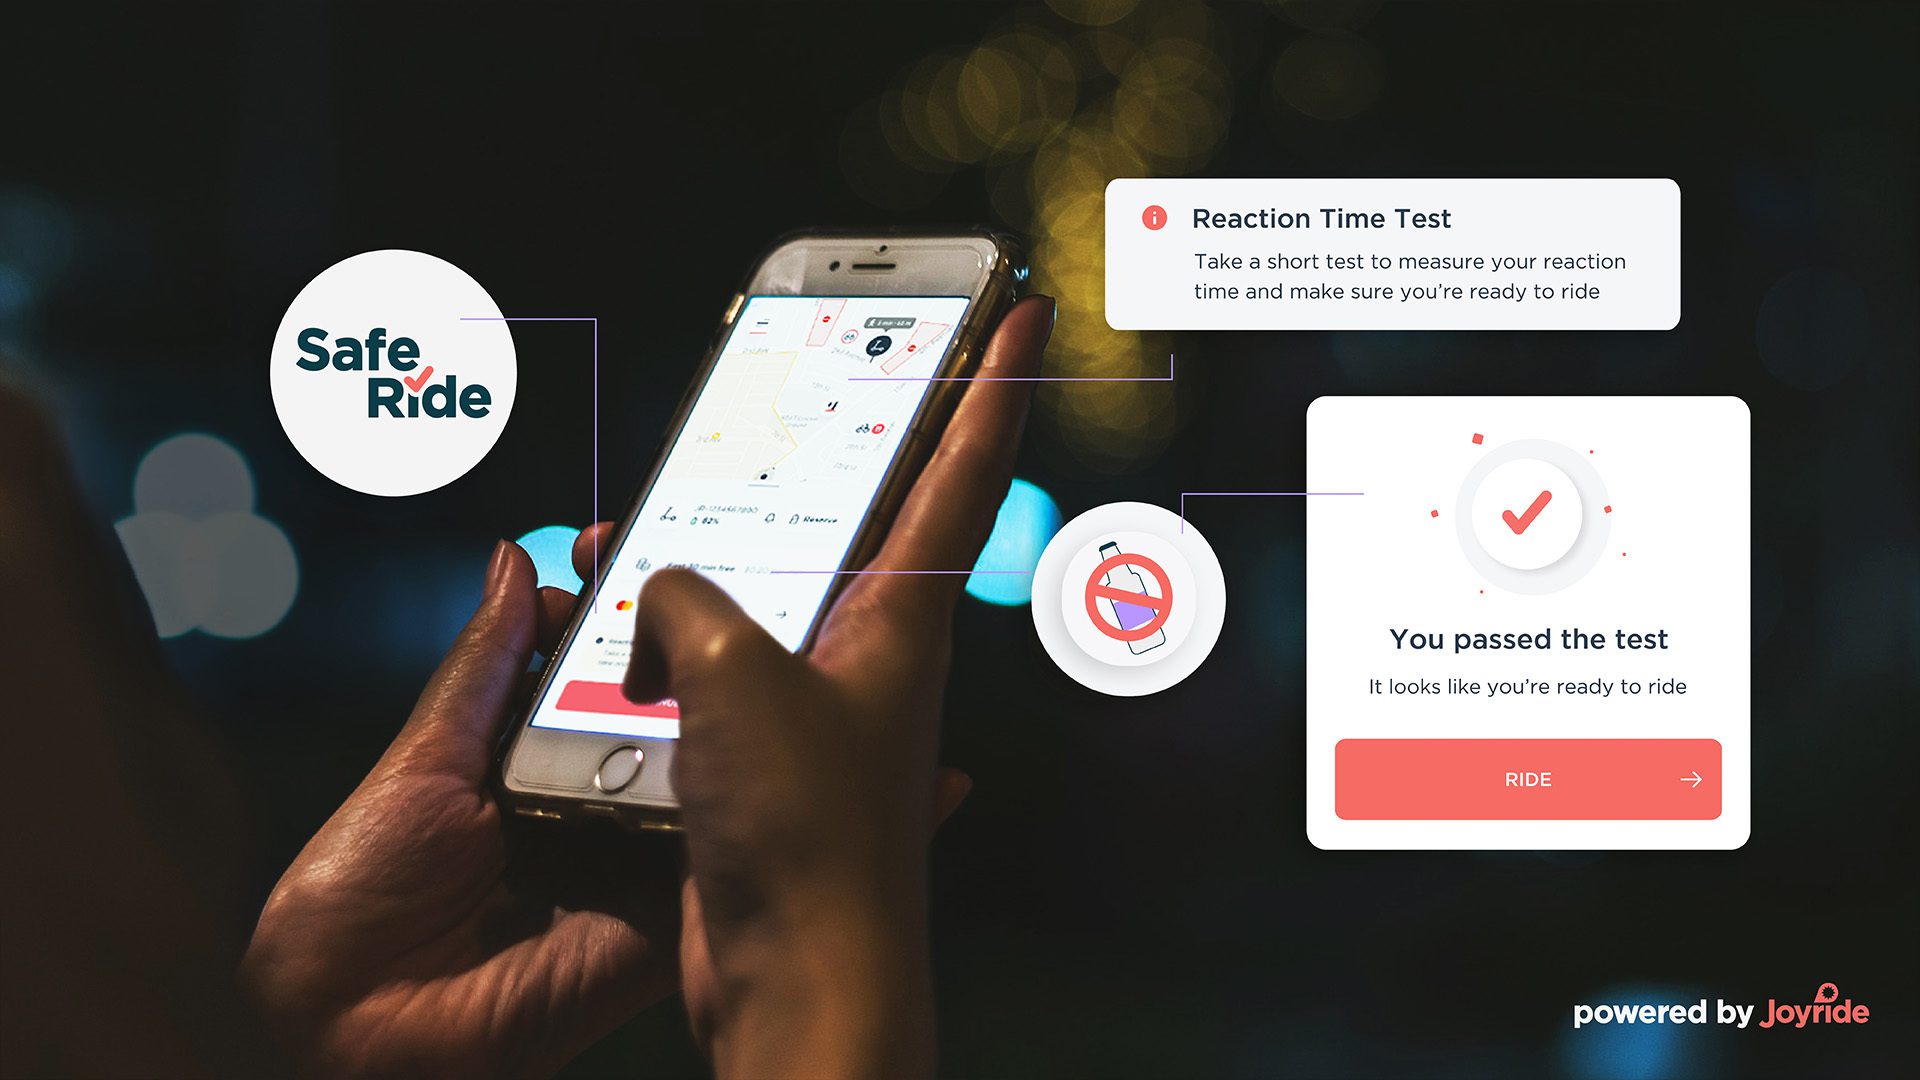 Ride: Joyride has your e-scooter Reaction Test down to science